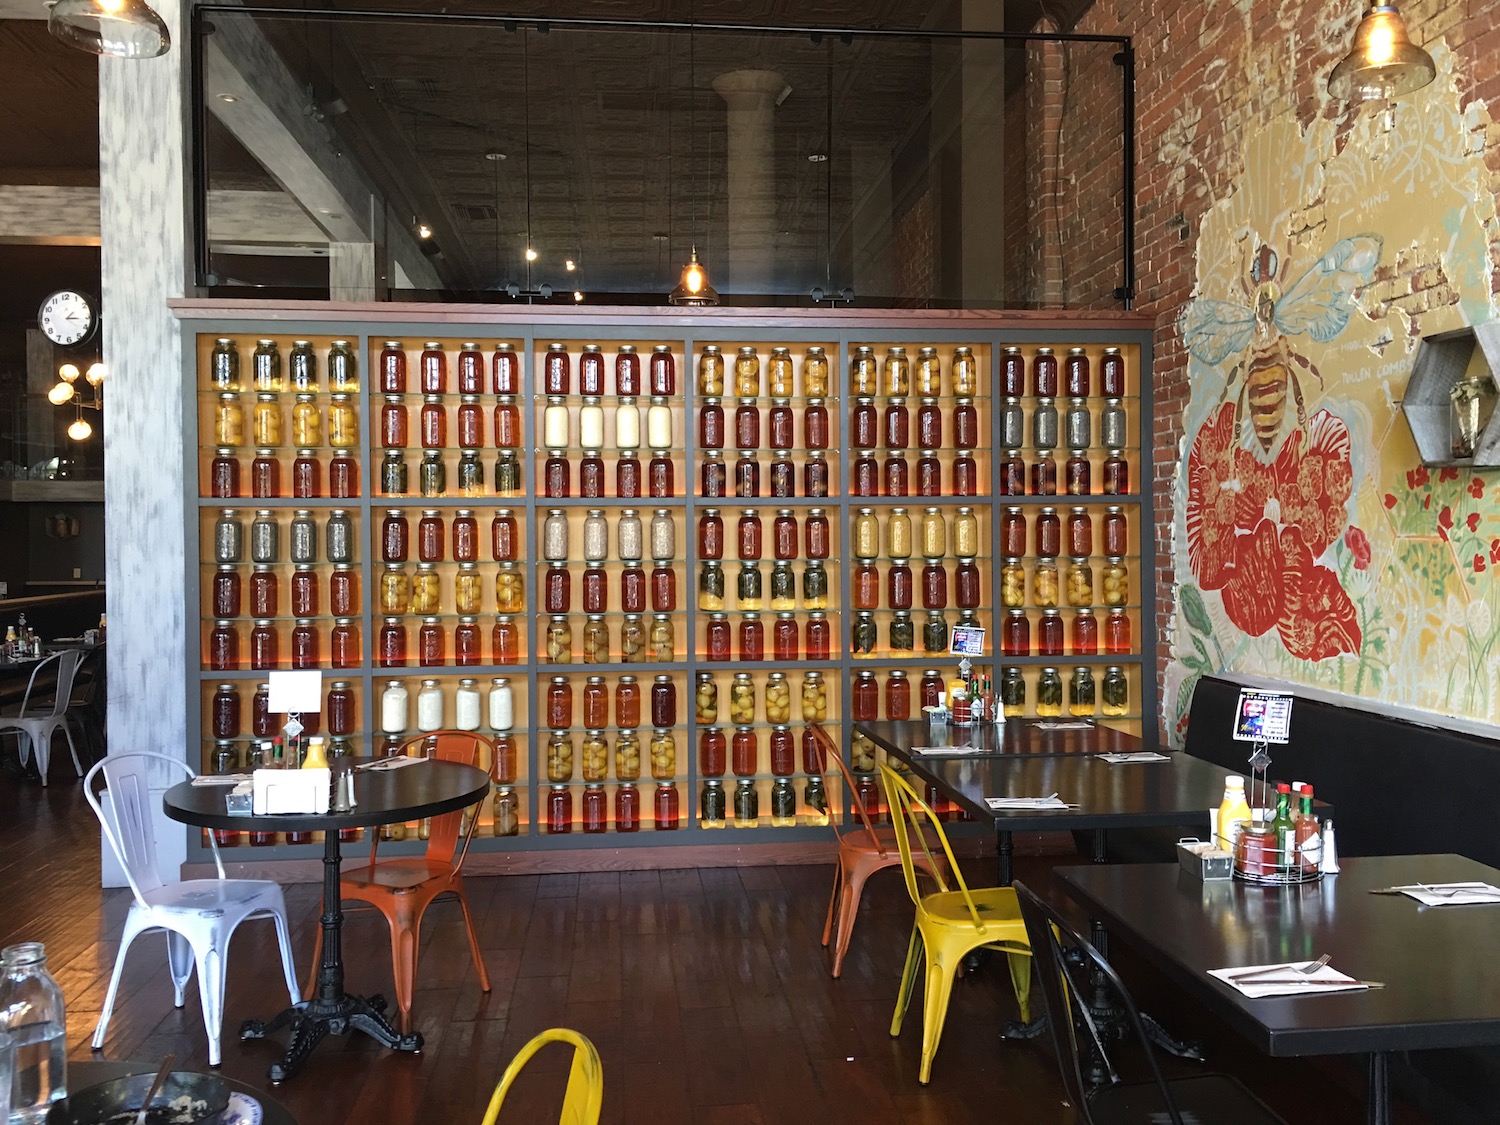 Honey Eatery and Social takes inspiration from the close-knit community of a beehive, desiring a place where people can step in to eat, drink and socialize after buzzing around town all day.